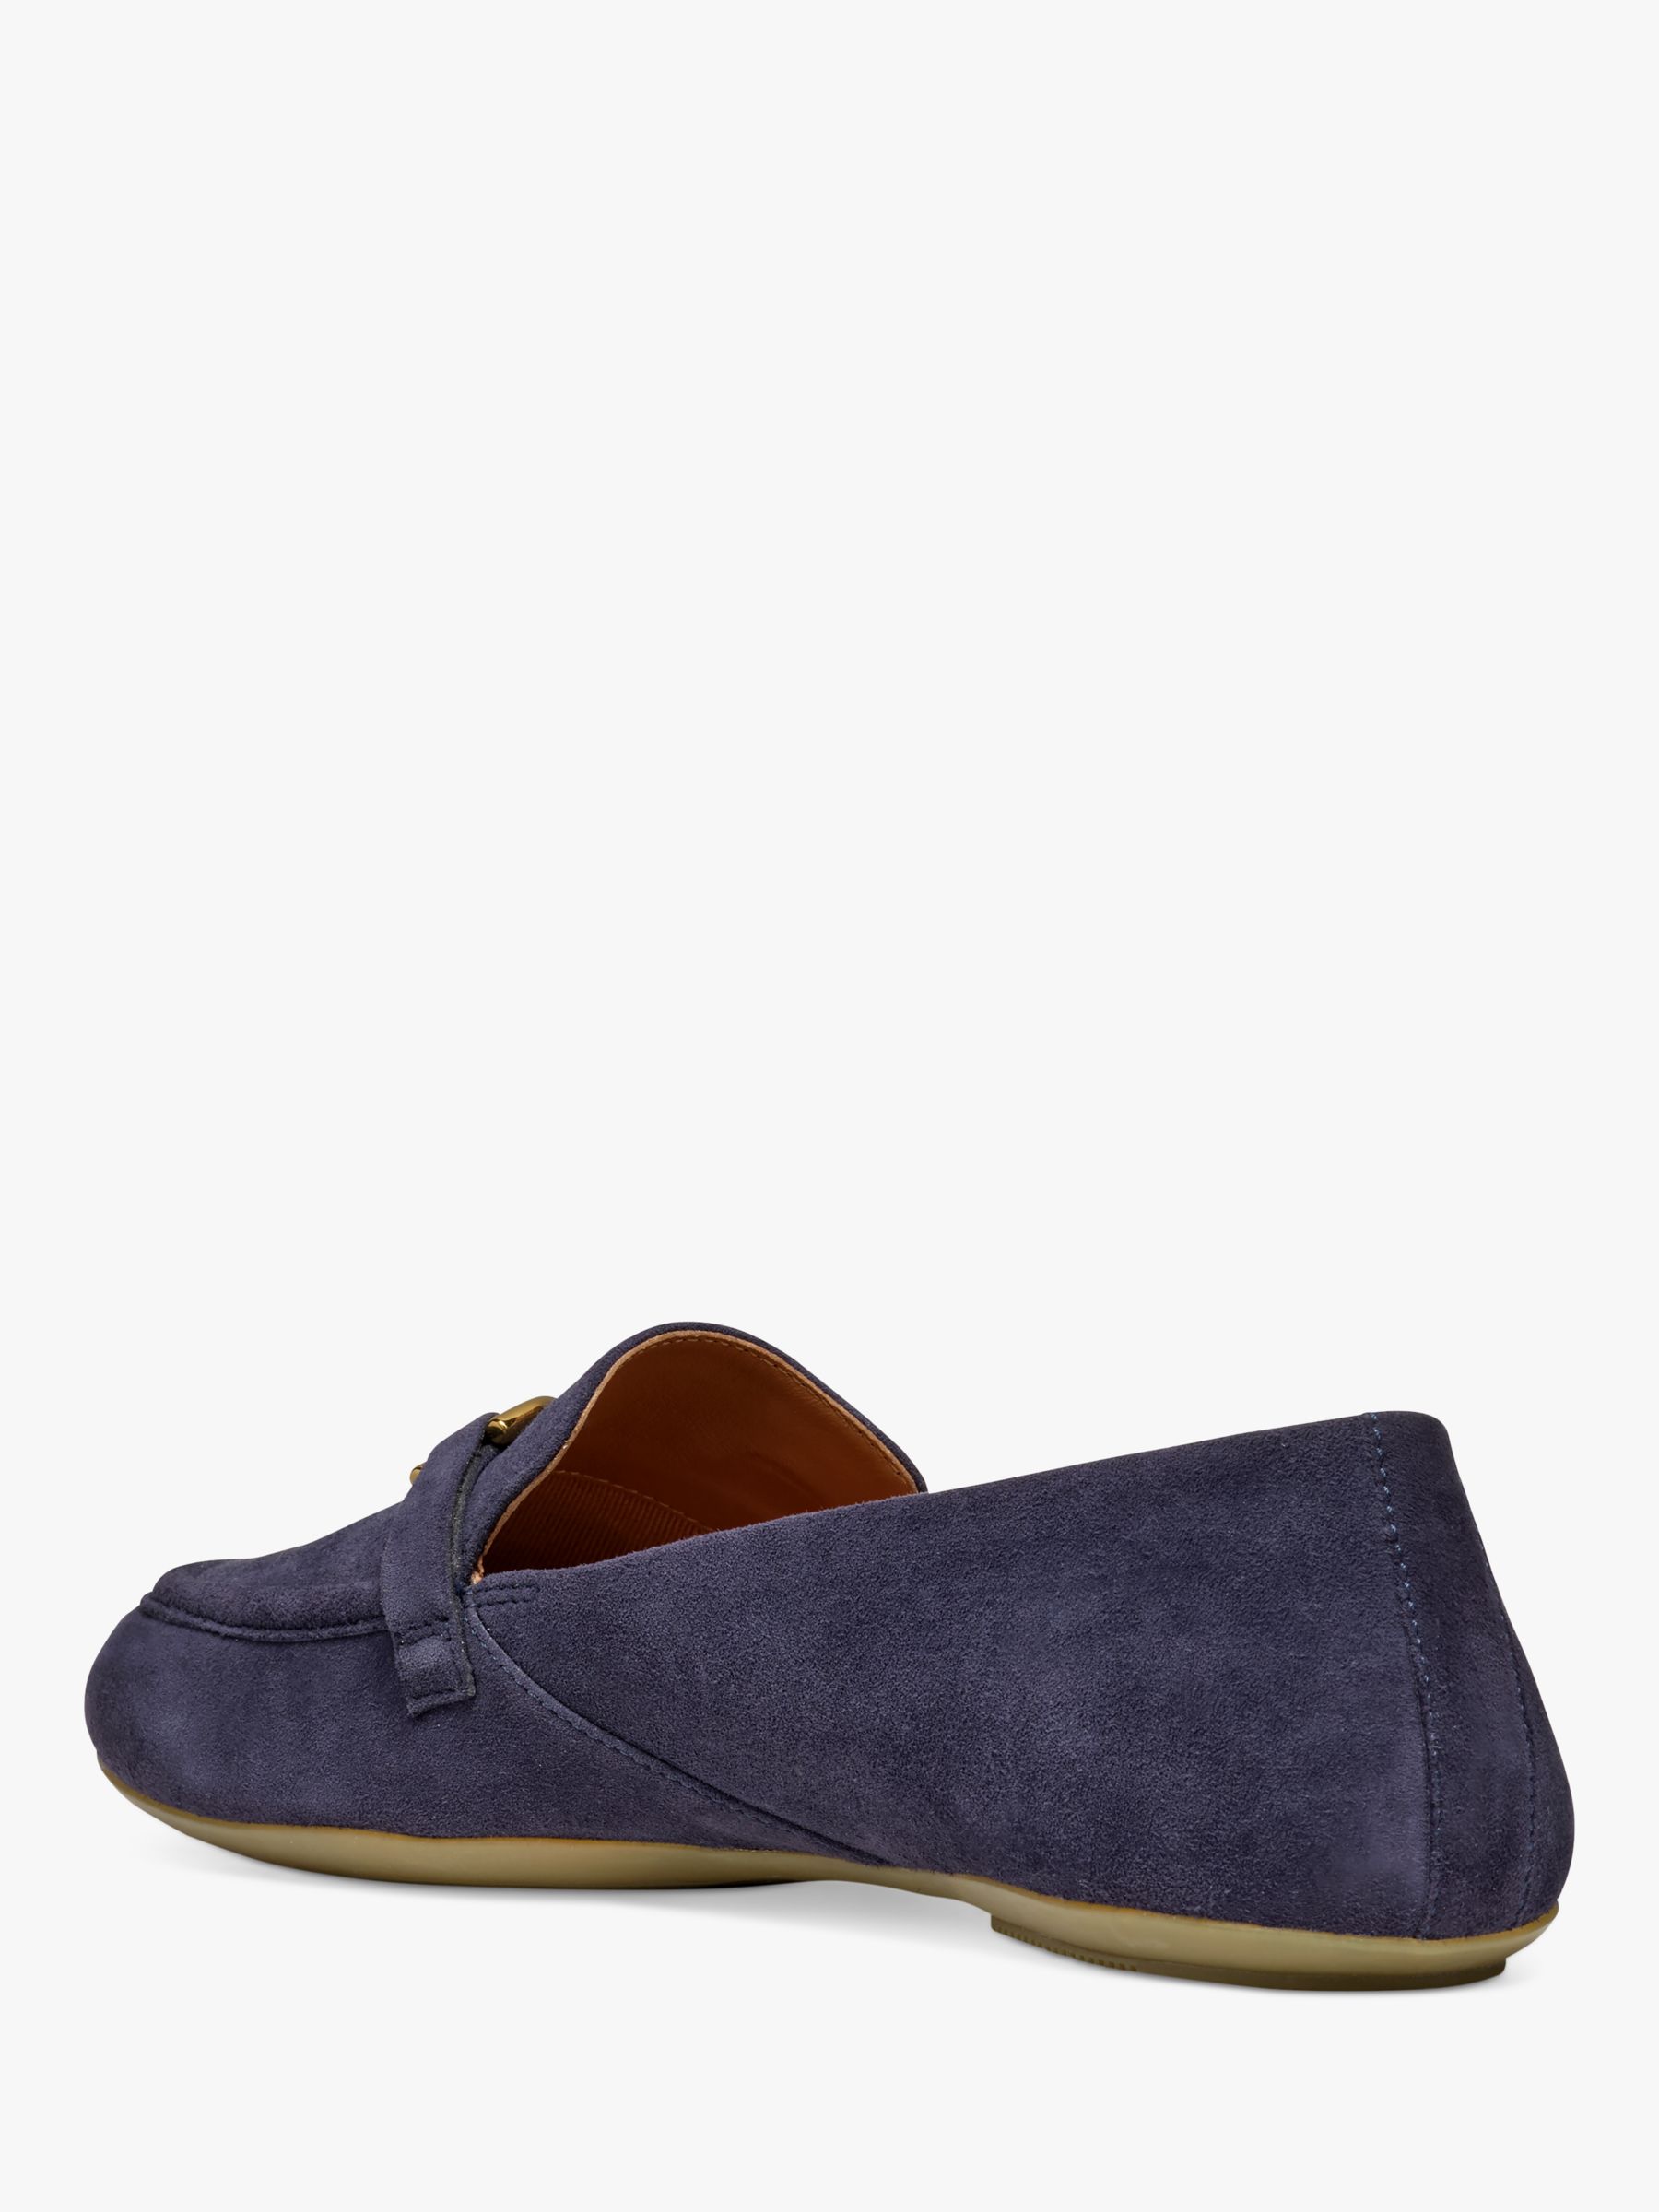 Geox Palmaria Suede Loafers, Navy, EU36.5